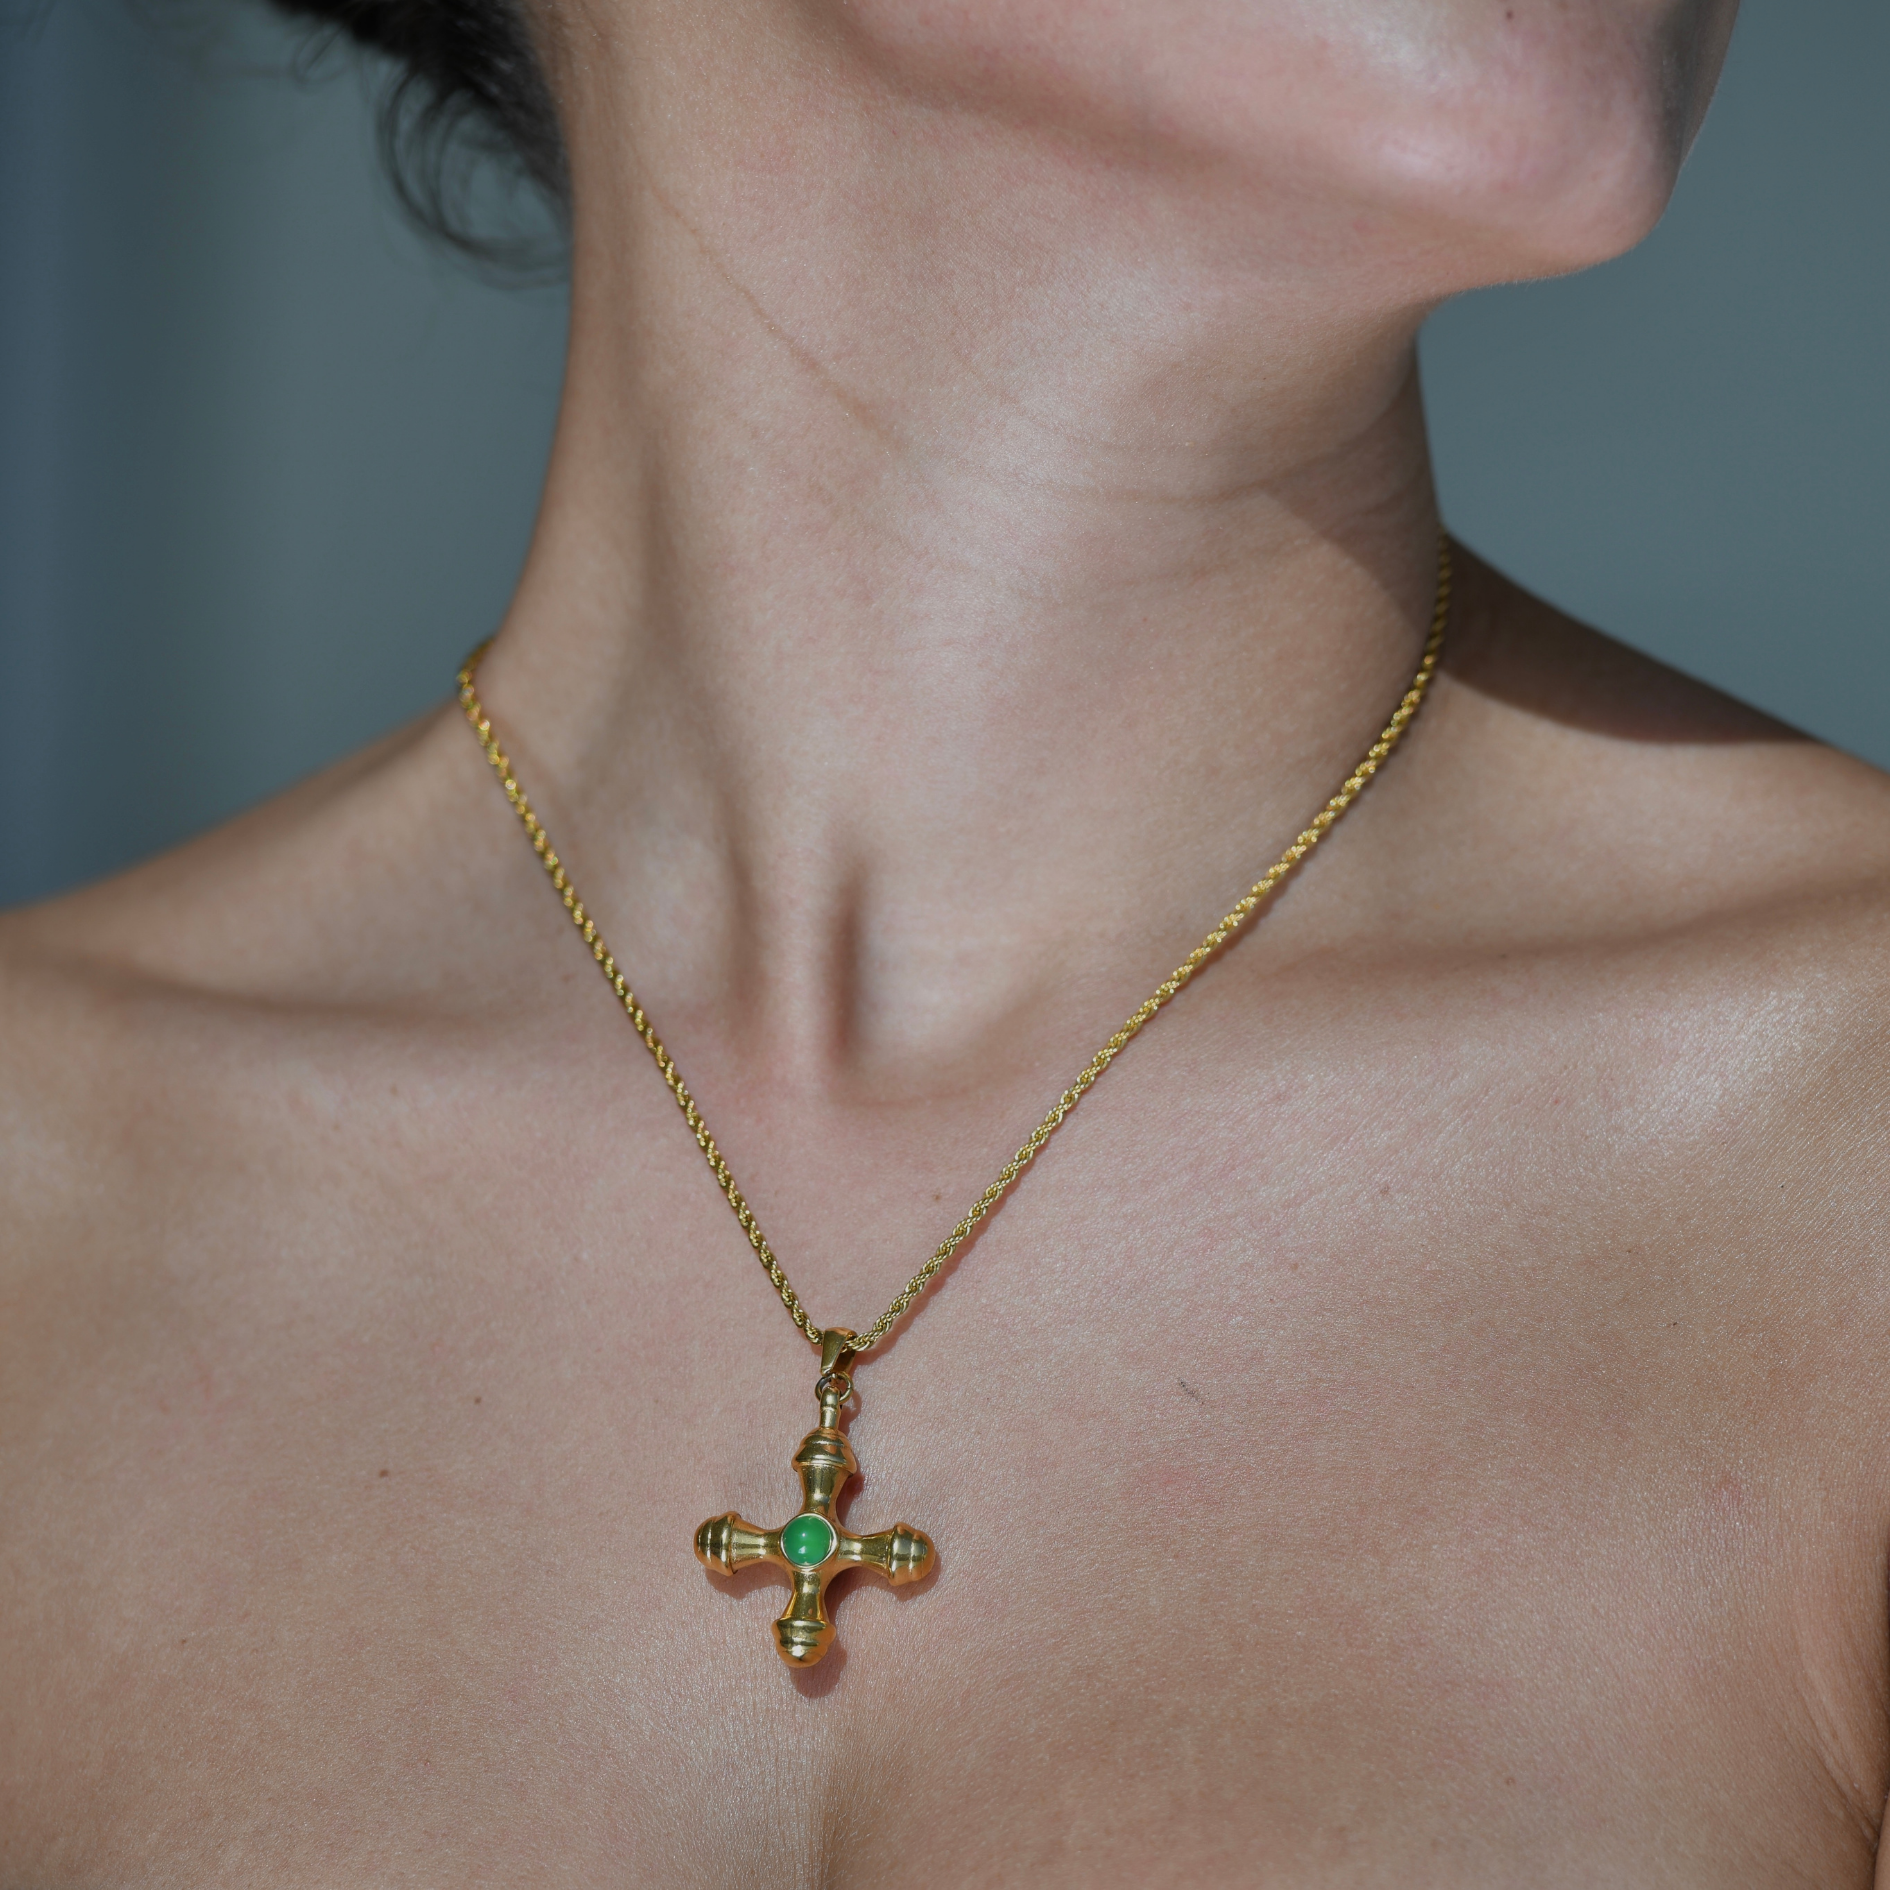 gold plated rope chain necklace. A gold cross hangs on the chain. In the middle of the cross is a green stone.